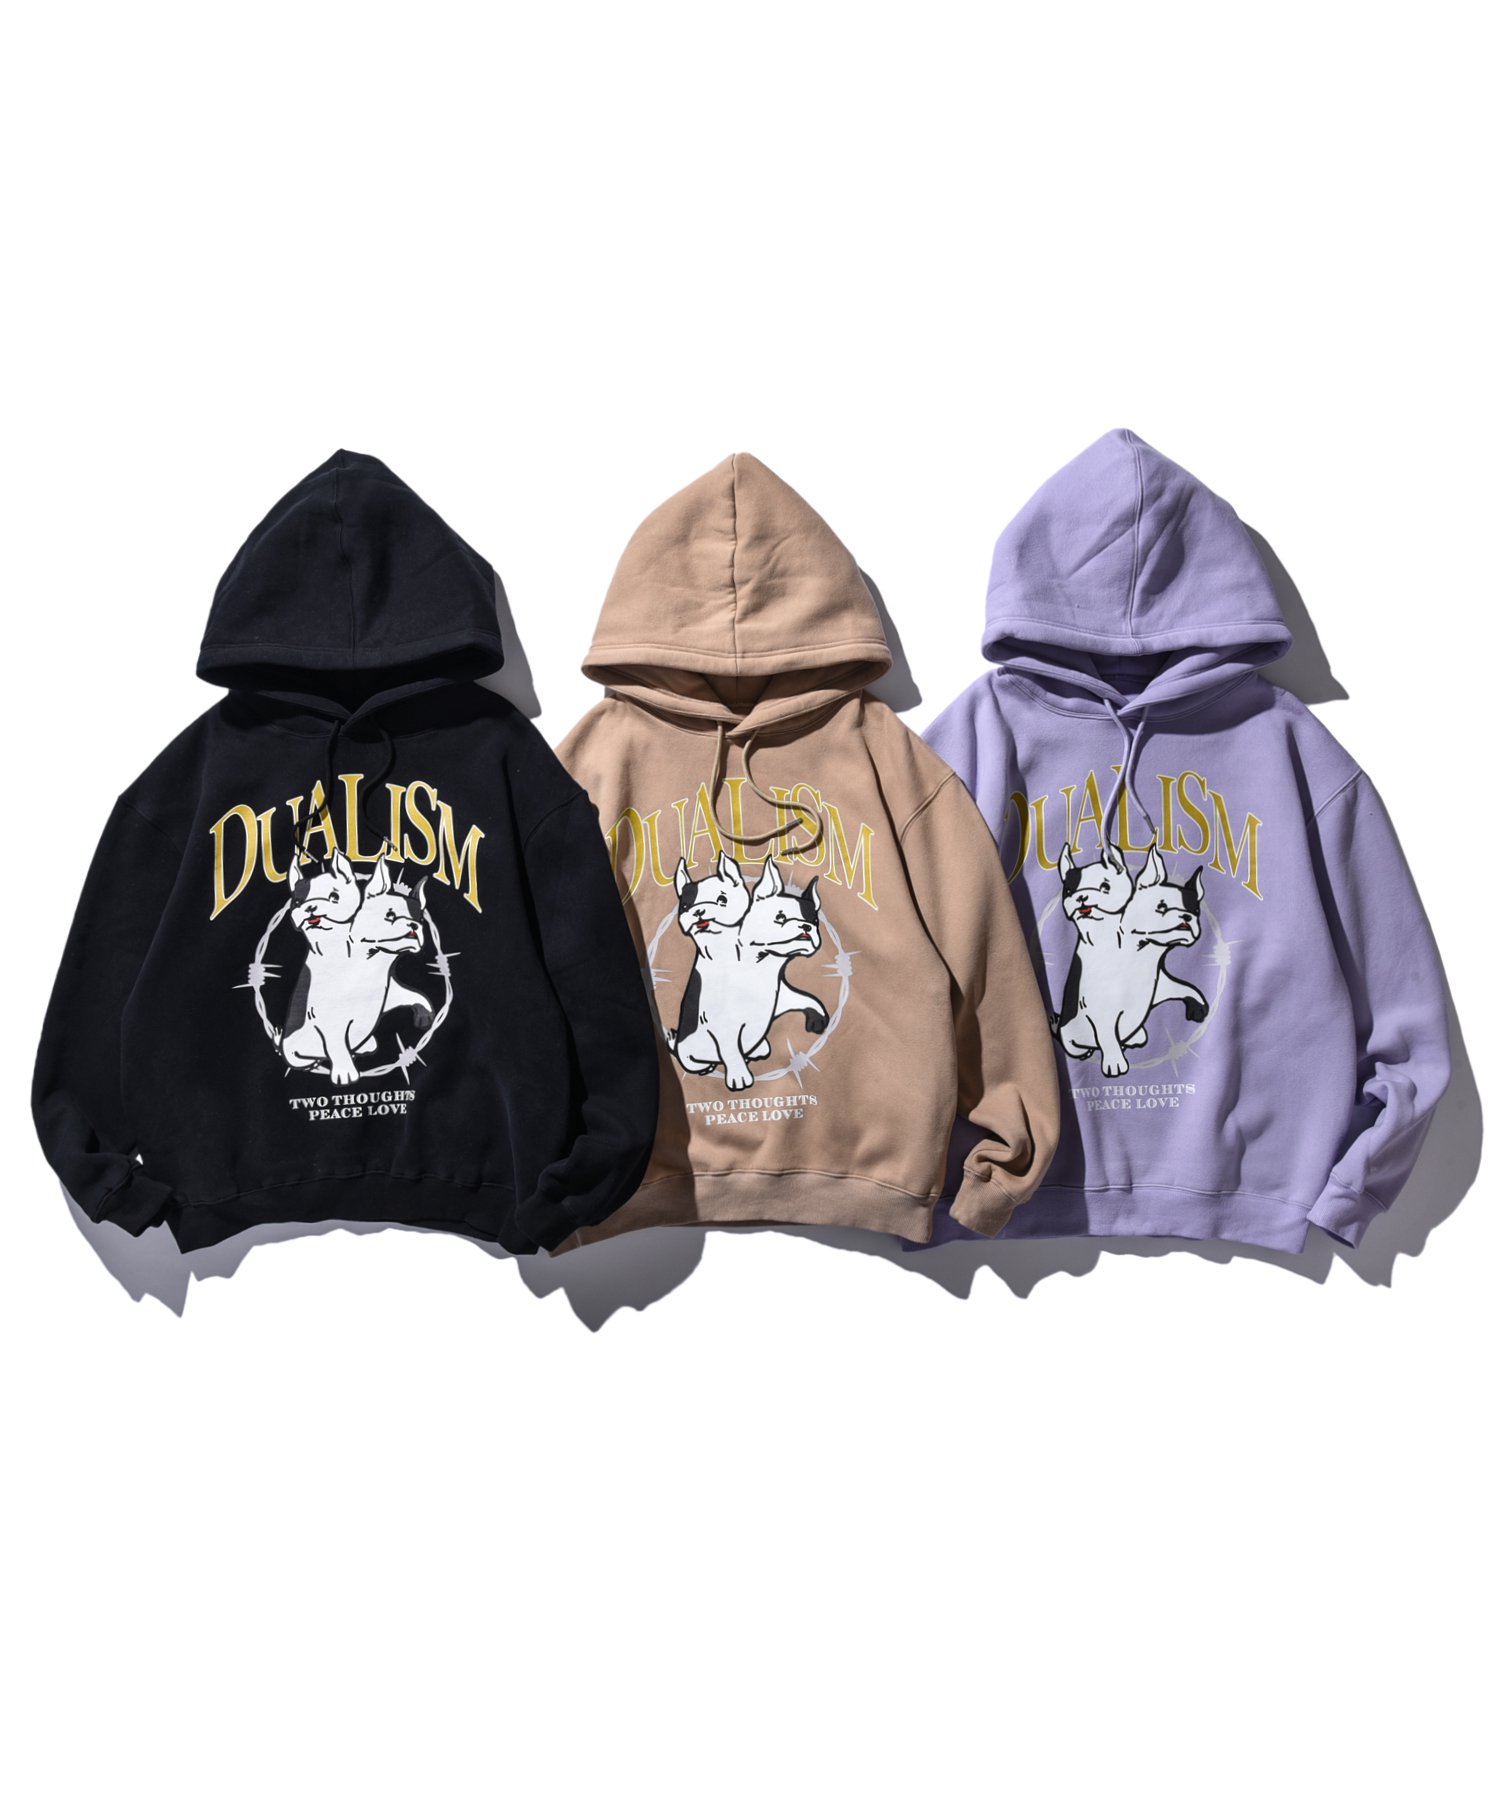 DUALISM/DLSM(デュアリズム) フードパーカー TWO HEAD DOG HOODIE 公式通販サイト |  DUALISM/DLSM公式通販サイト